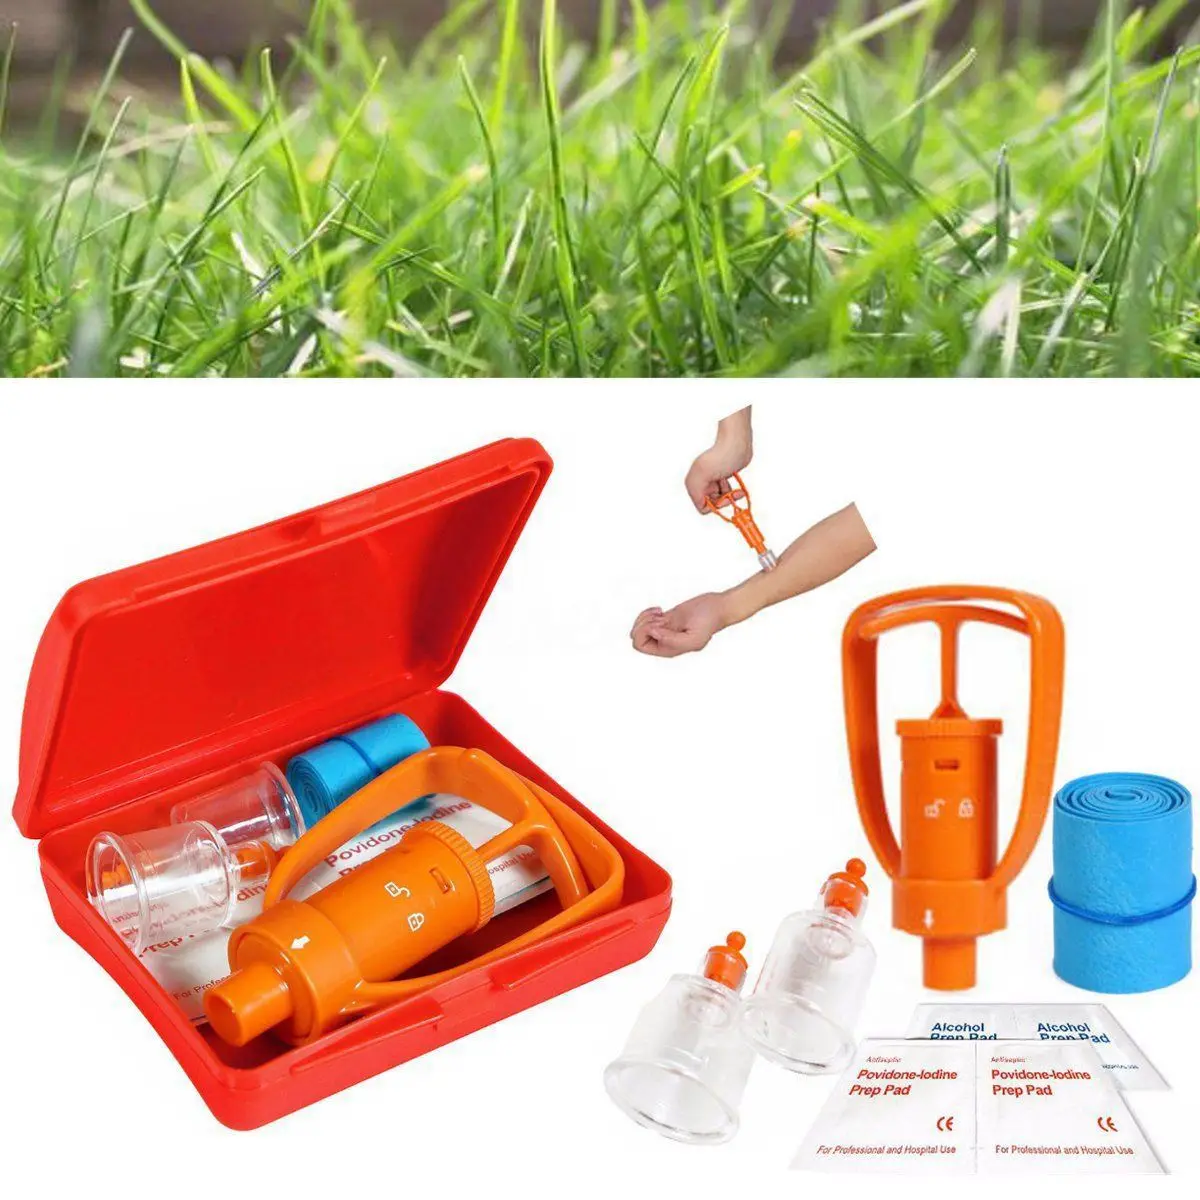 

New Venom Extractor Pump First Aid Safety Kit Emergency Snake Bite Outdoor Camping Survival Tool SOS For Wild Vipers Bees Biting